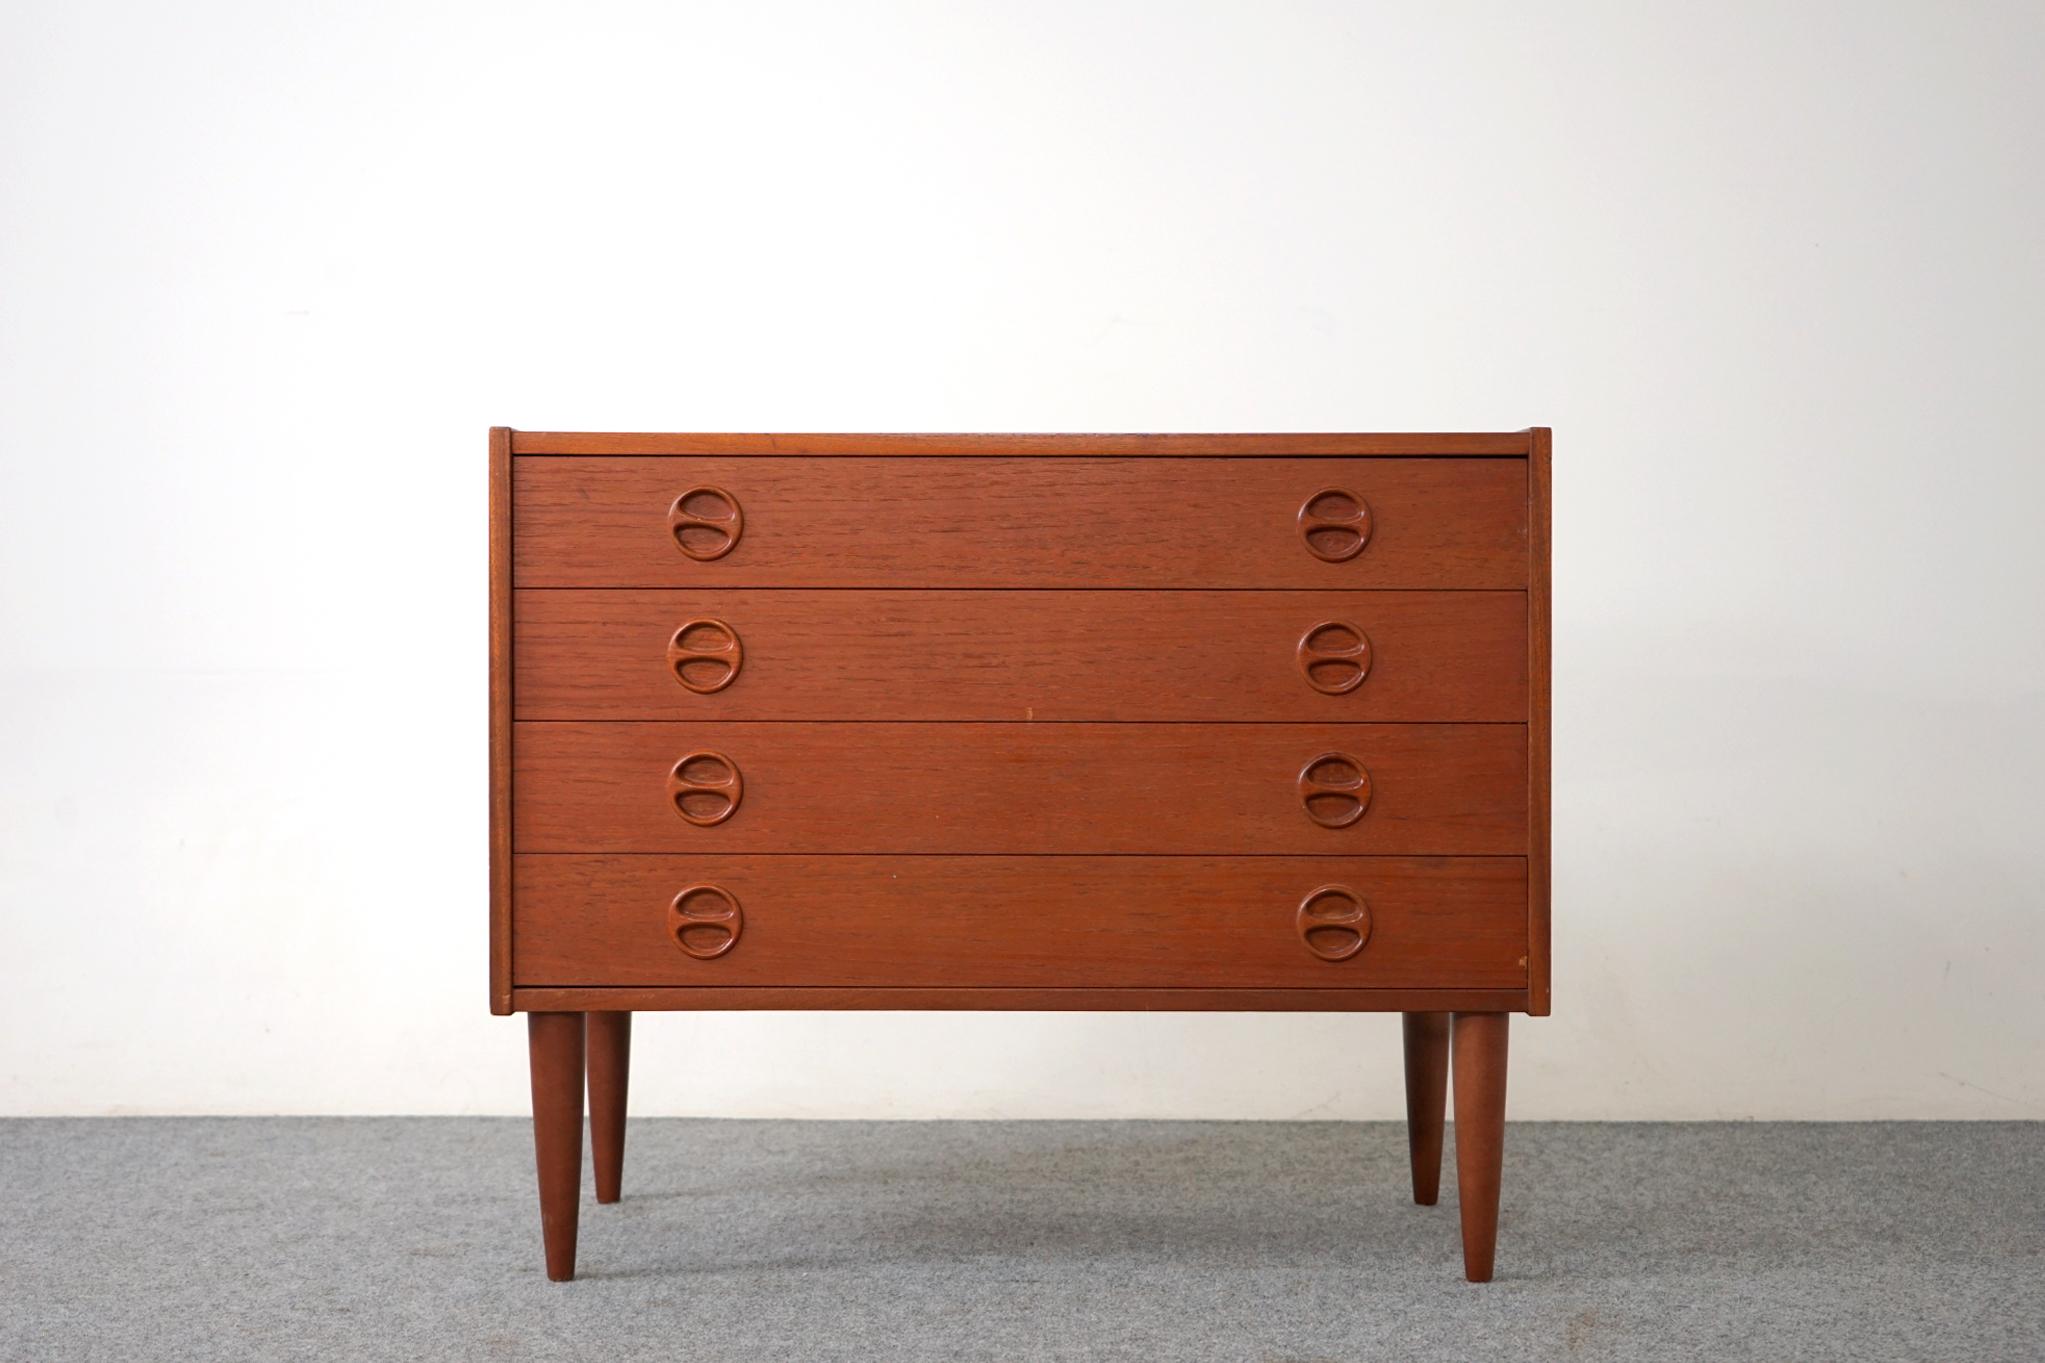 Teak Danish dresser circa, 1960's. Unique, solid wood circular pulls on each drawer provide a simple yet stylish handle to open the drawers. This four drawer dresser features solid wood edging with stunning book-matched veneer on all drawer faces